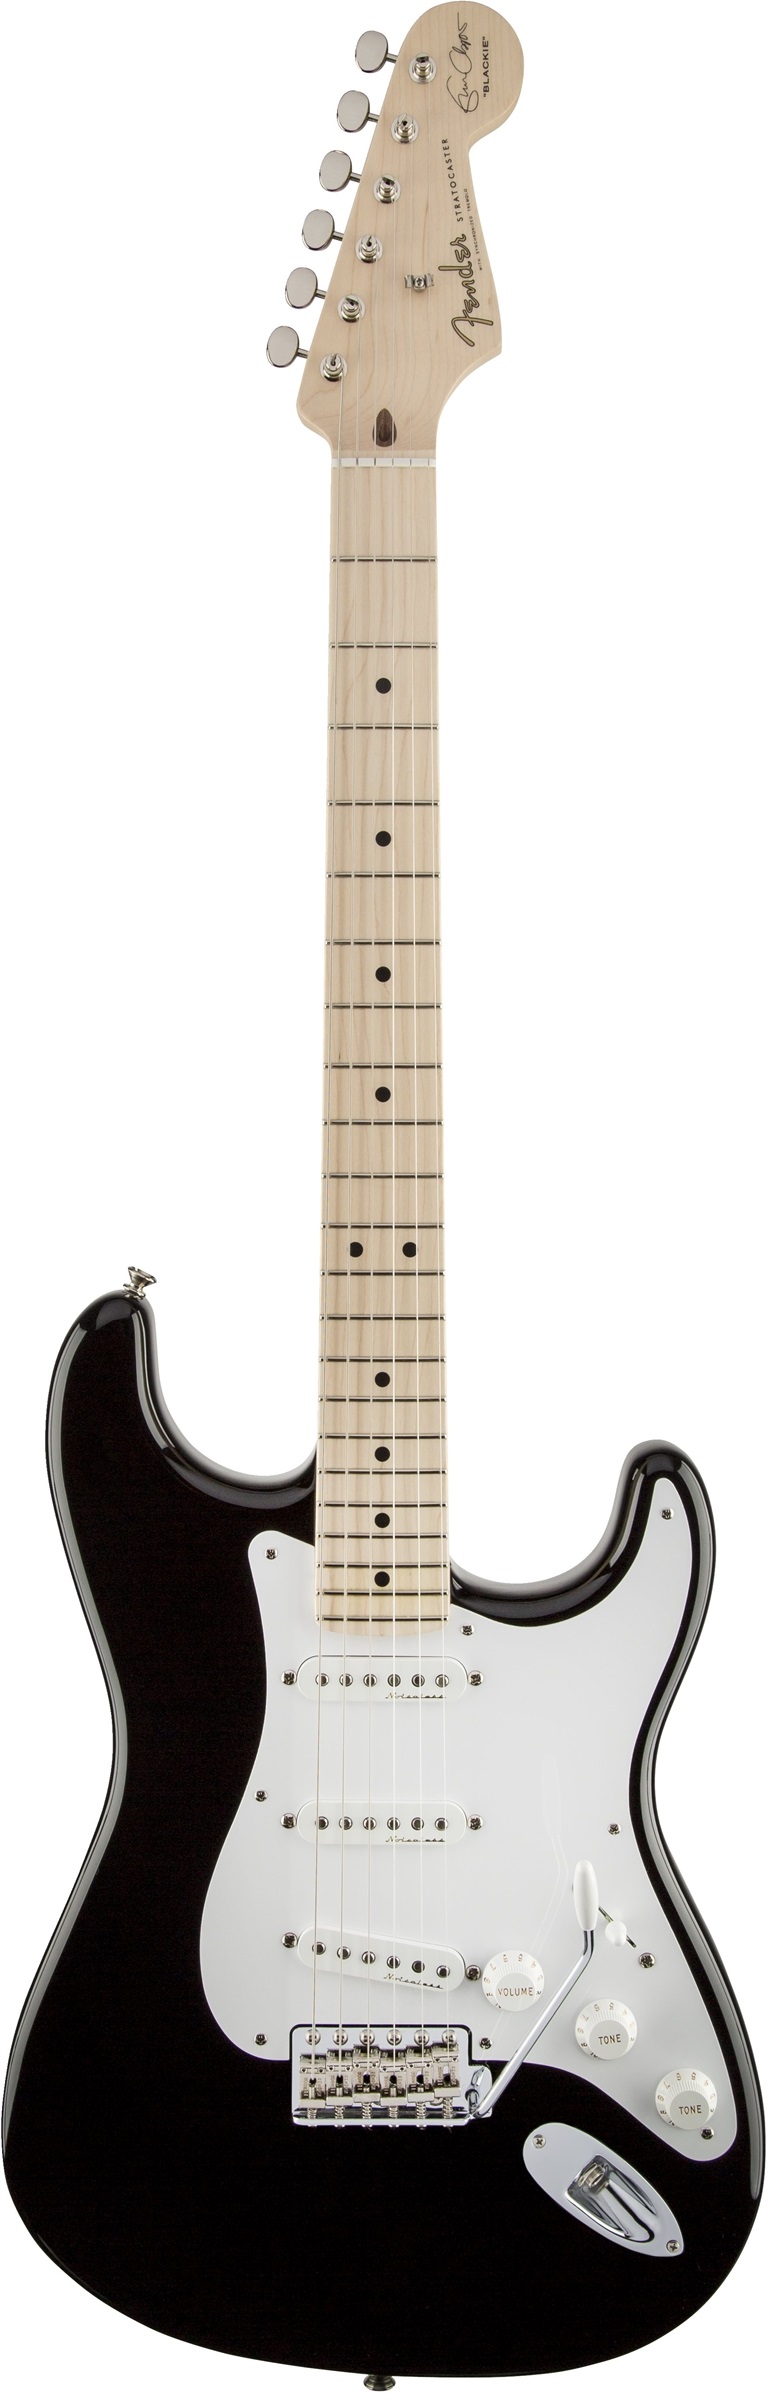 An image of Fender Eric Clapton Blackie Stratocaster Signature Guitar | PMT Online